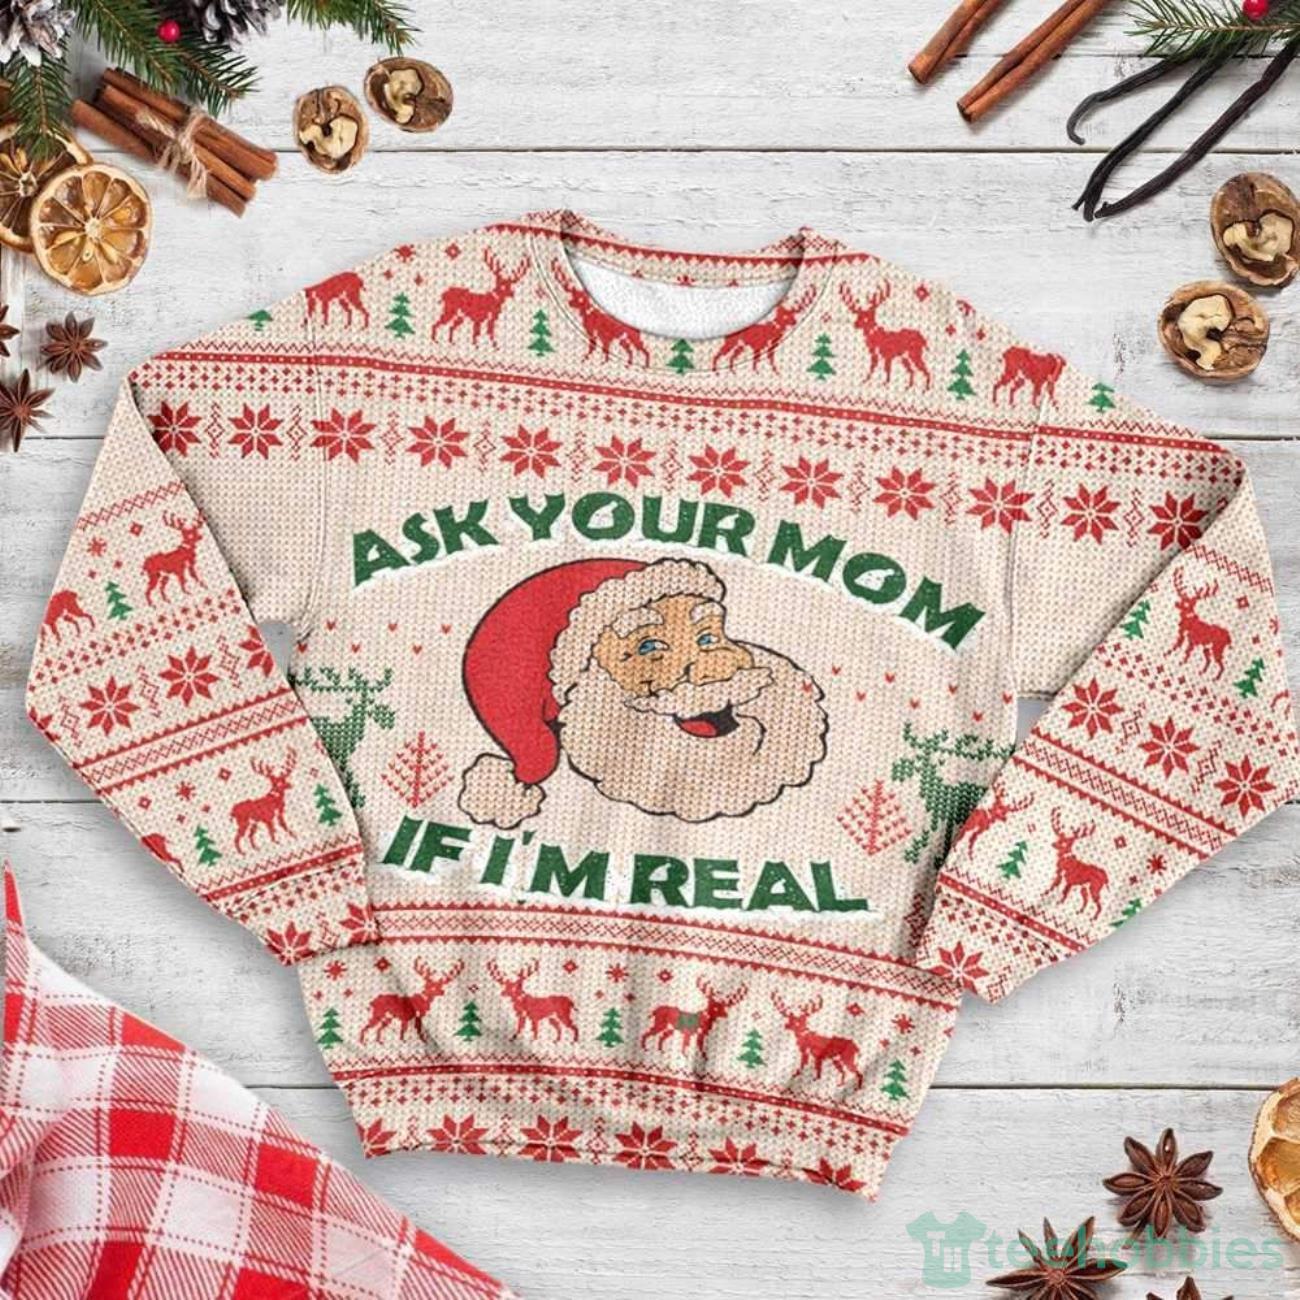 Ask Your Mom If I’m Real Santa Claus Ugly Sweater For Christmas Product Photo 1